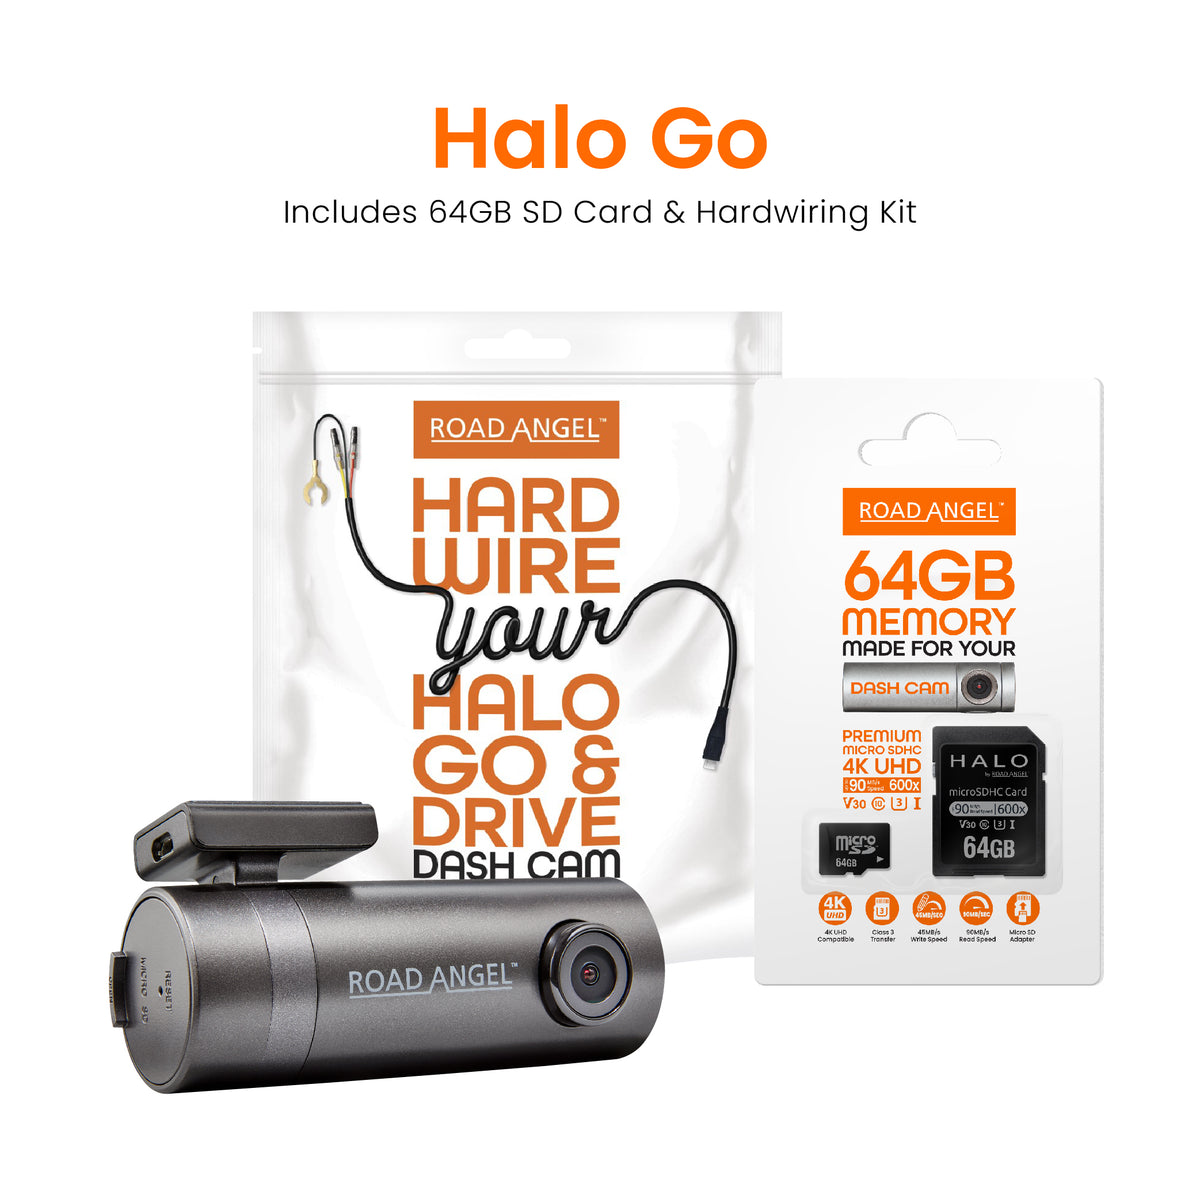 Road Angel Halo Go Compact Dash Cam with SD Card & Hardwiring Kit Bundle